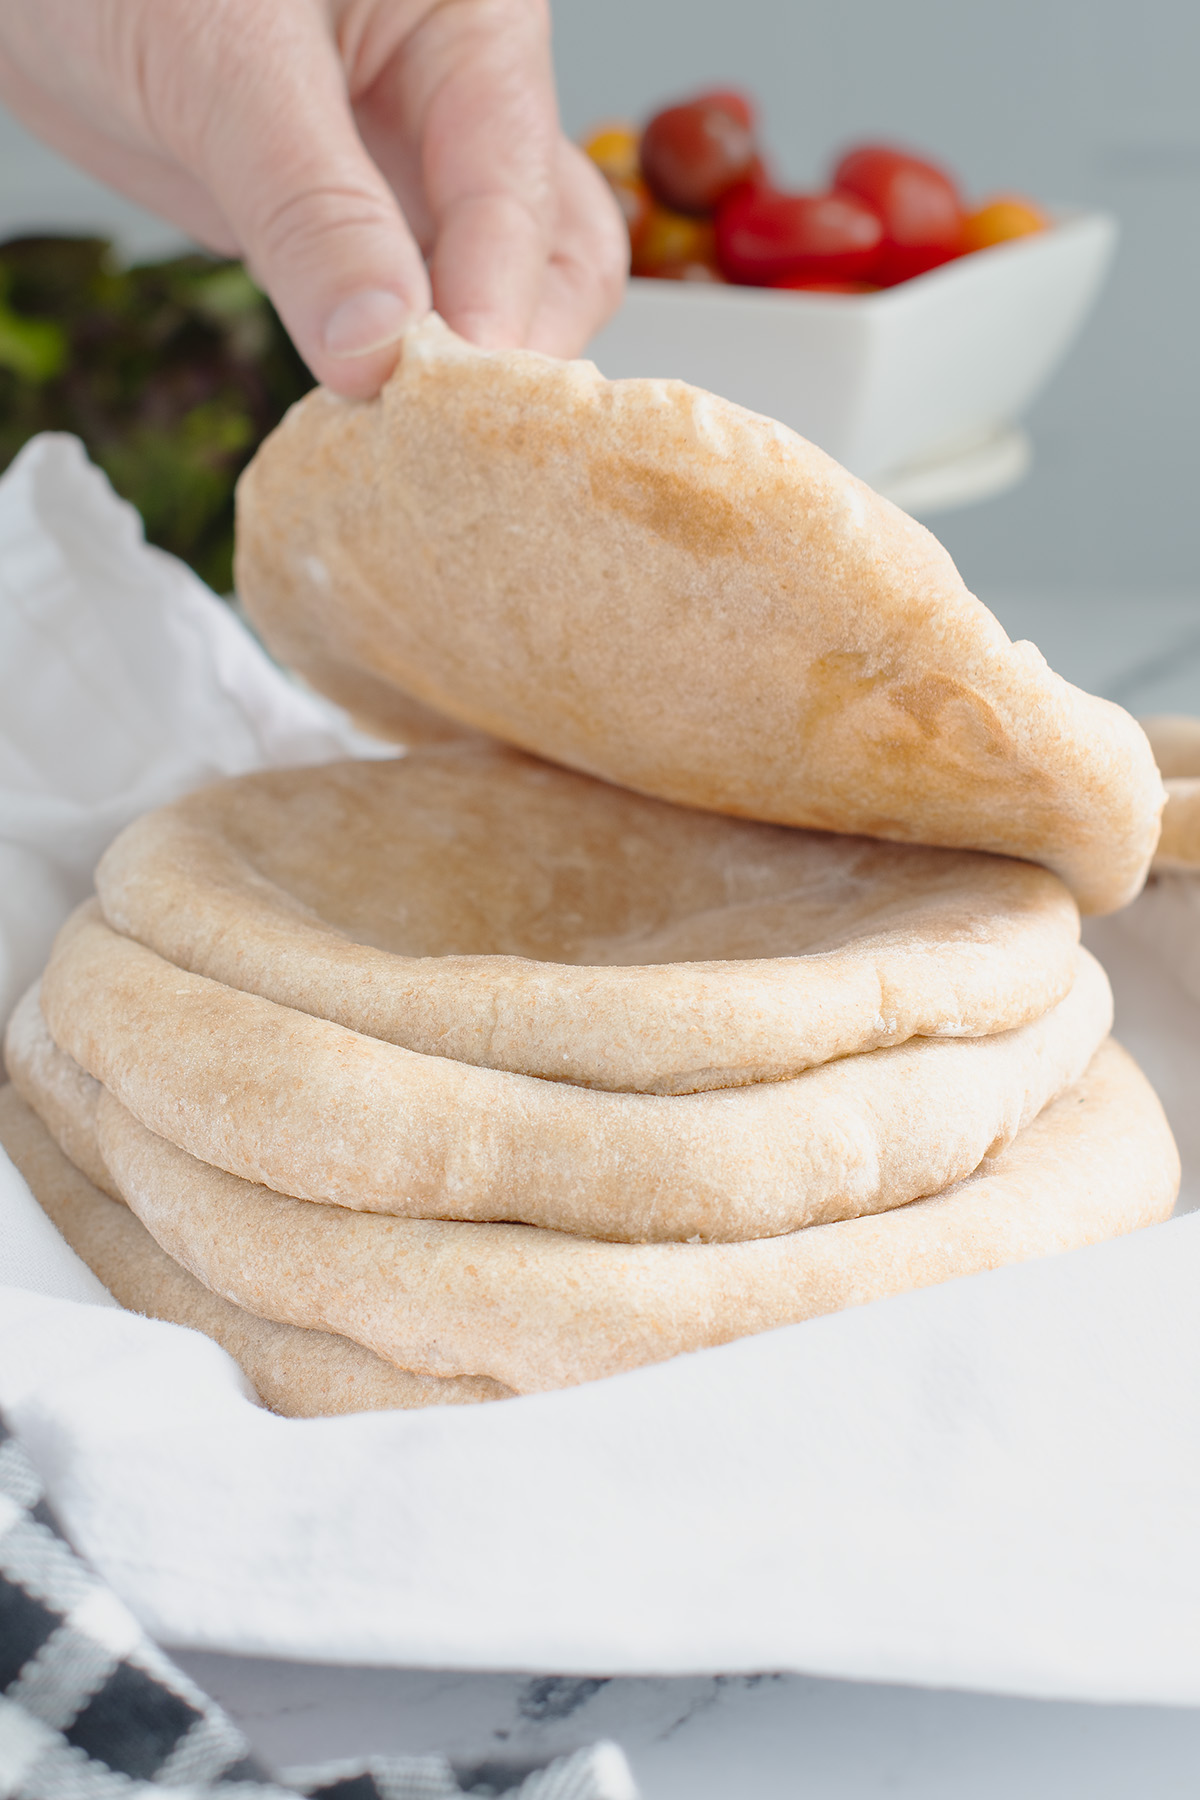 a hand lifting a pita bread off a stack set on a white cloth.